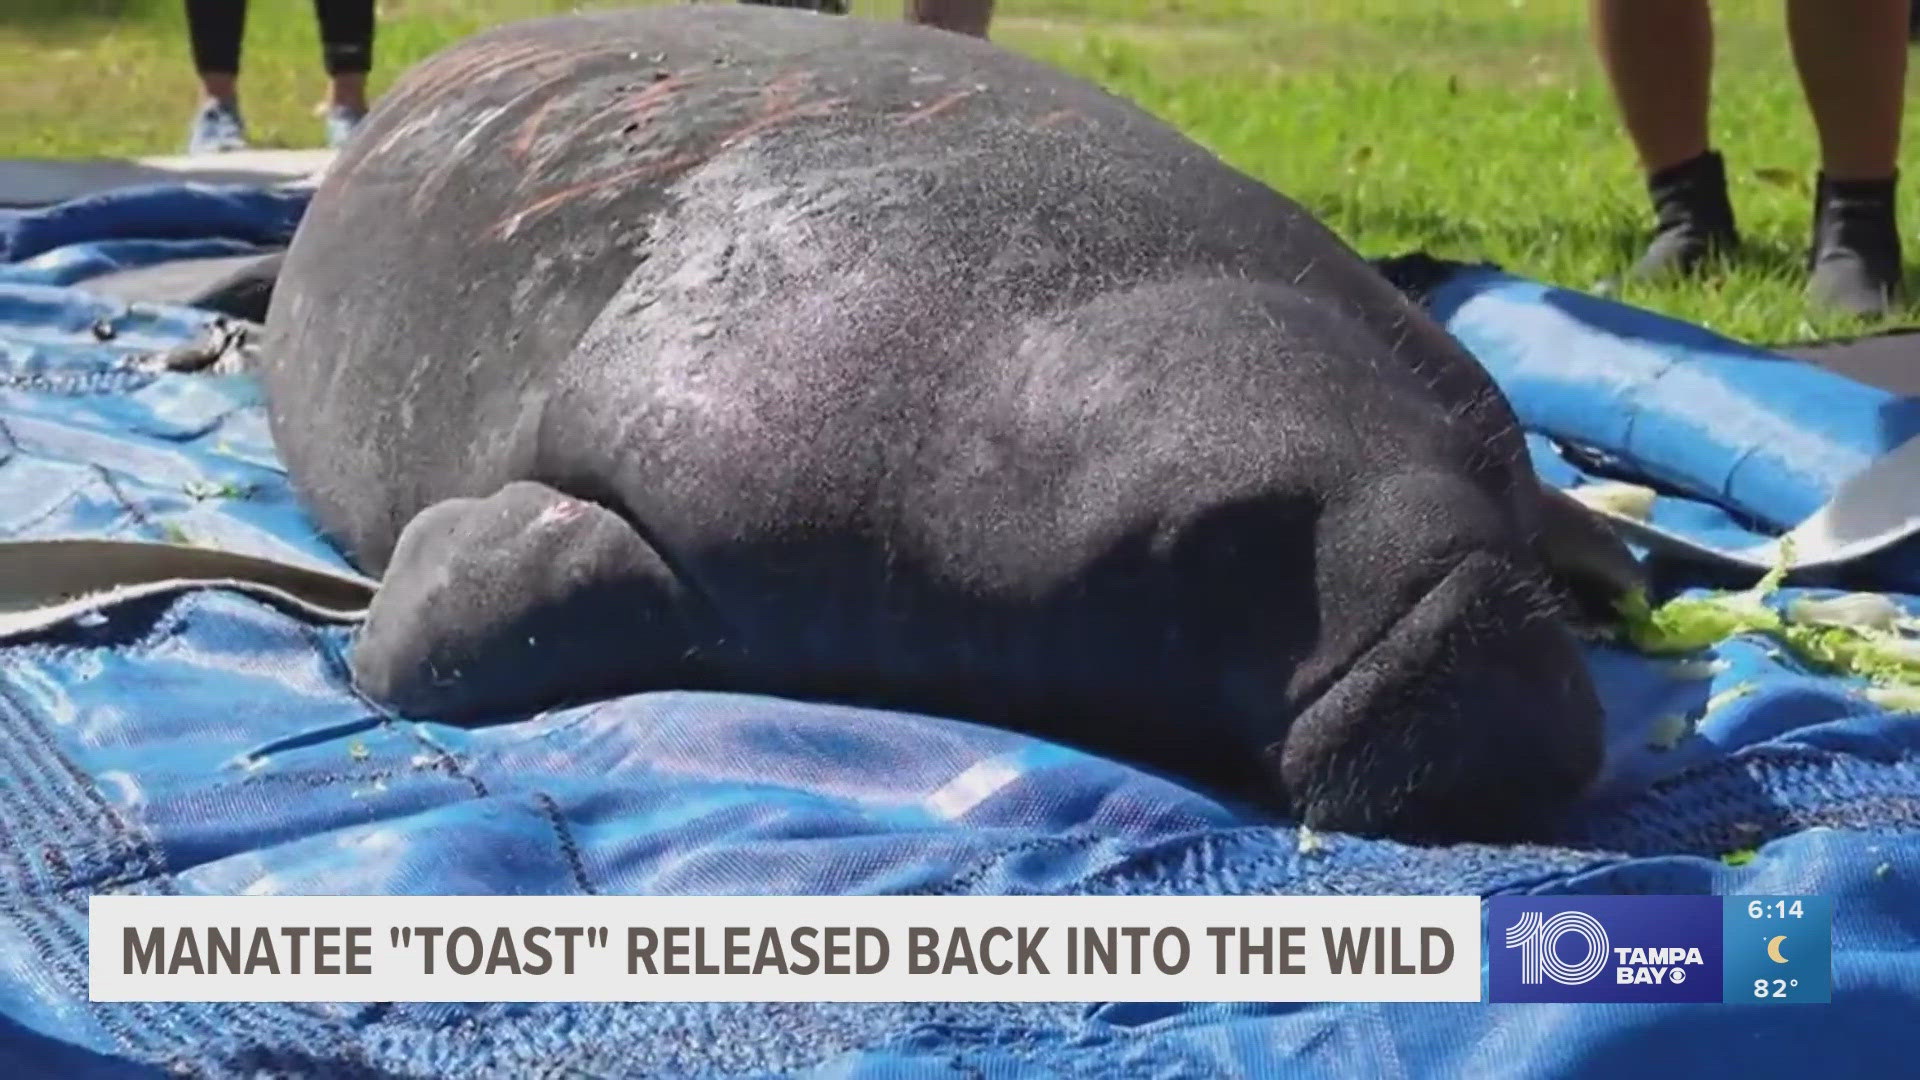 Toast was taken to SeaWorld Orlando for rehabilitation back in January but was released earlier this week into the wild.